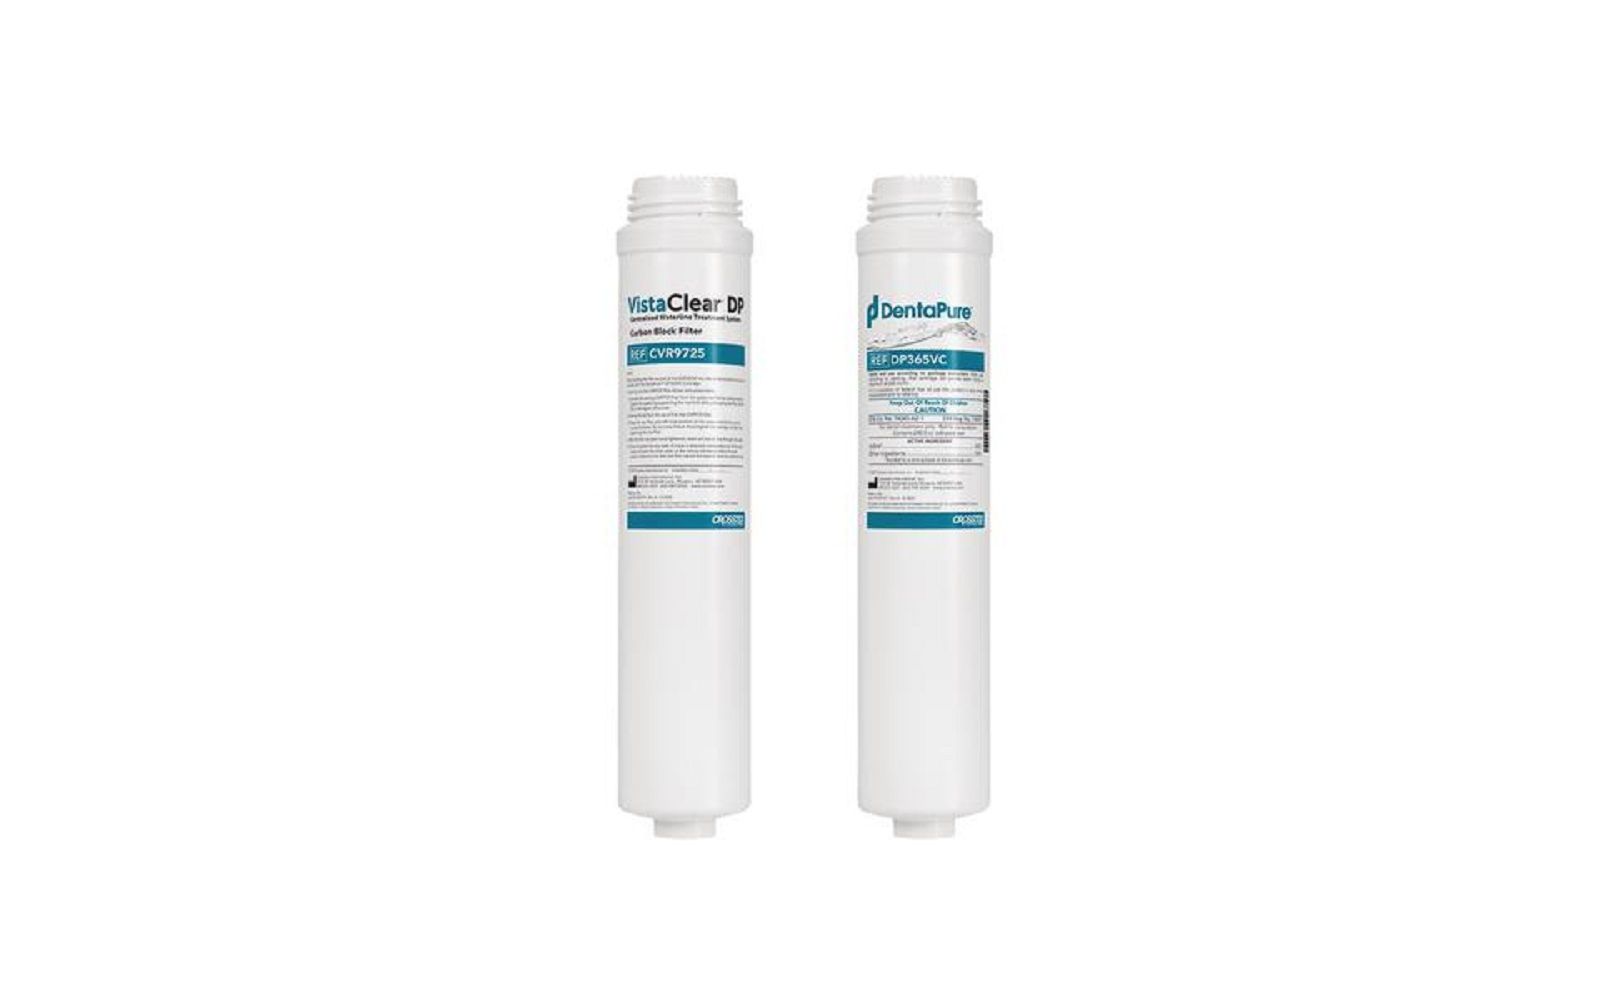 Annual replacement kit for vistaclear™ dp centralized waterline treatment system